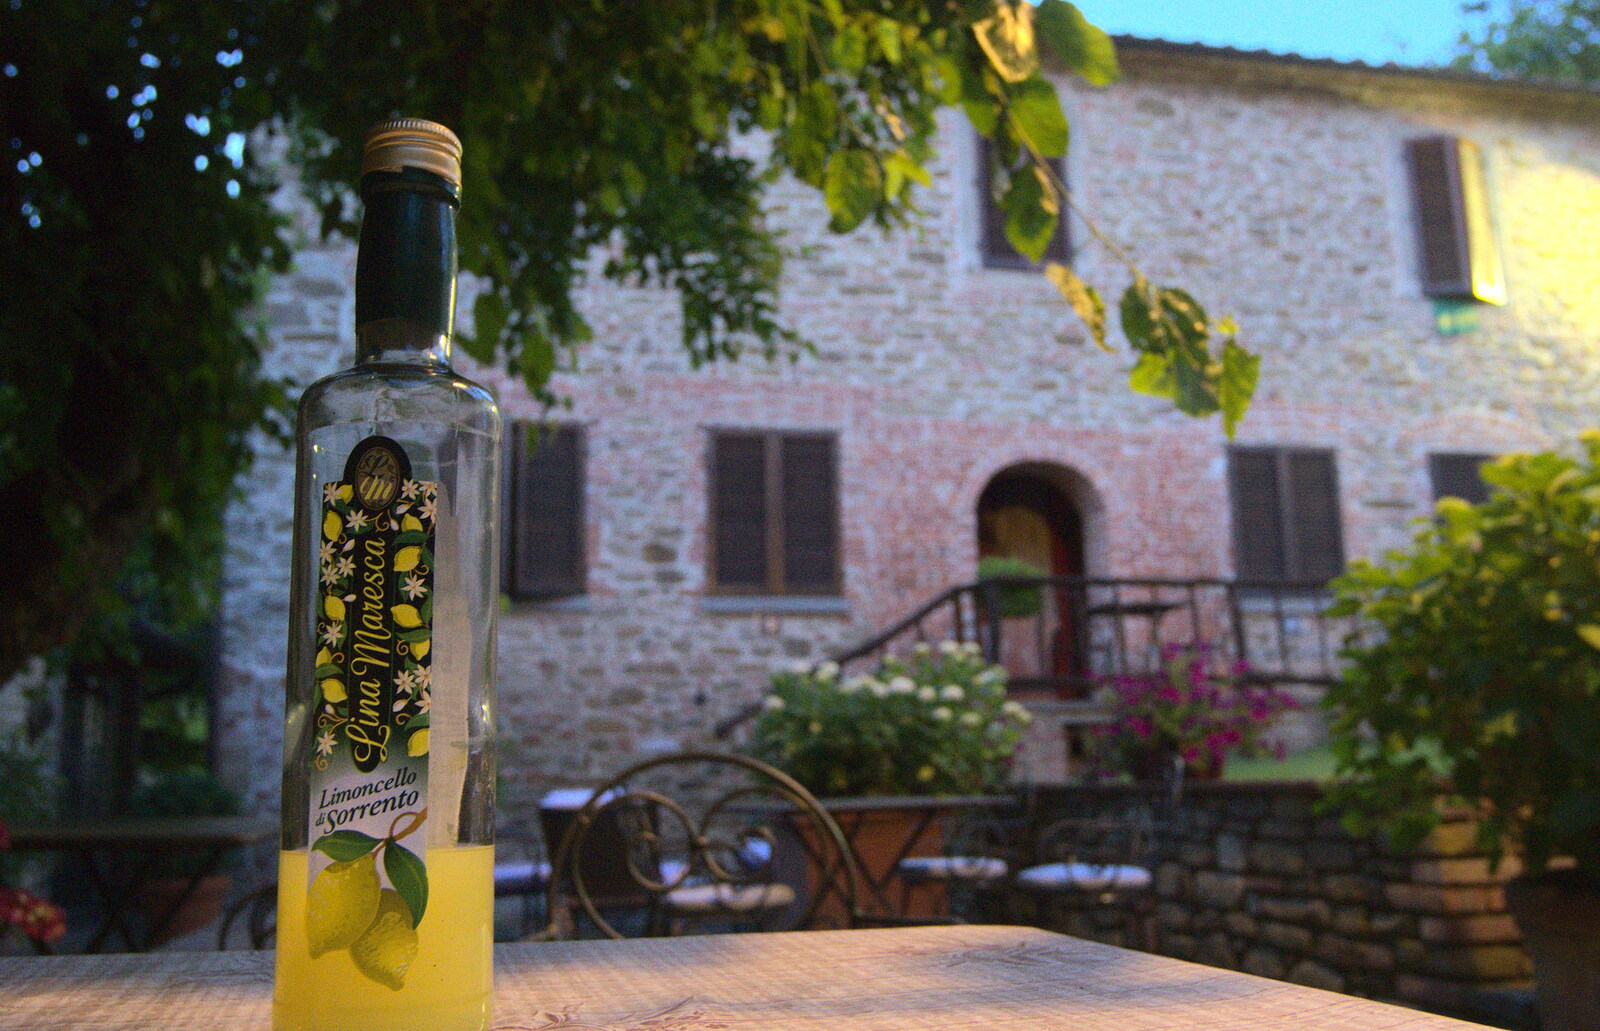 Ahh, the rustic joys of Limoncello time from Italian Weddings, Saracens and Swimming Pools, Arezzo, Tuscany - 12th June 2013